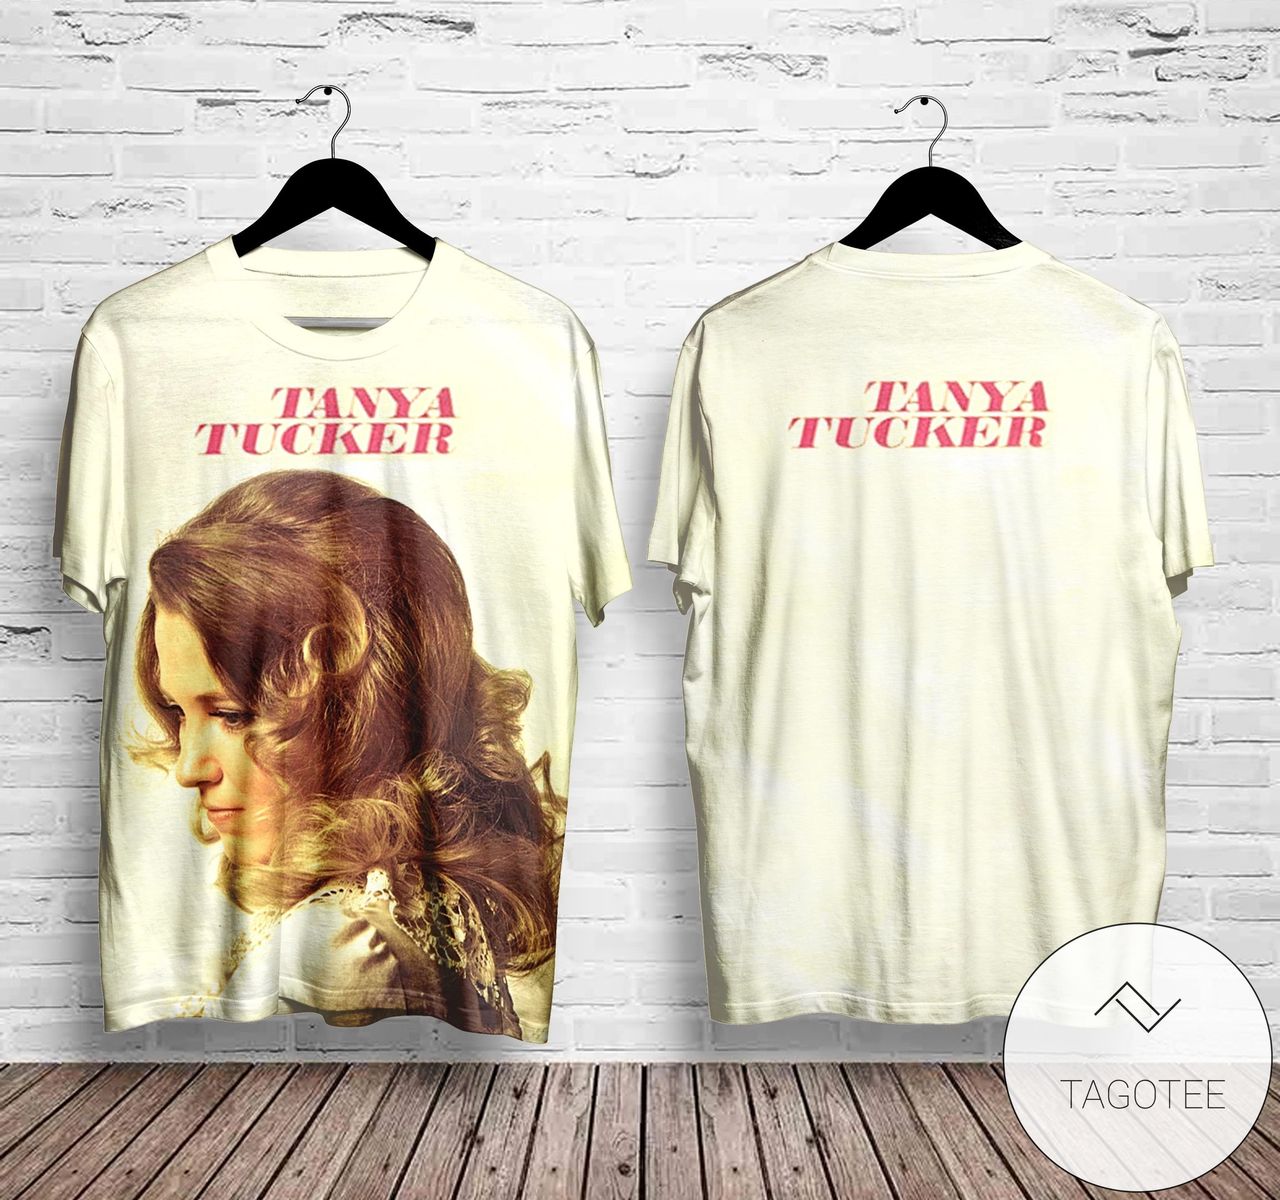 Tanya Tucker What's Your Mama's Name Album Cover Shirt